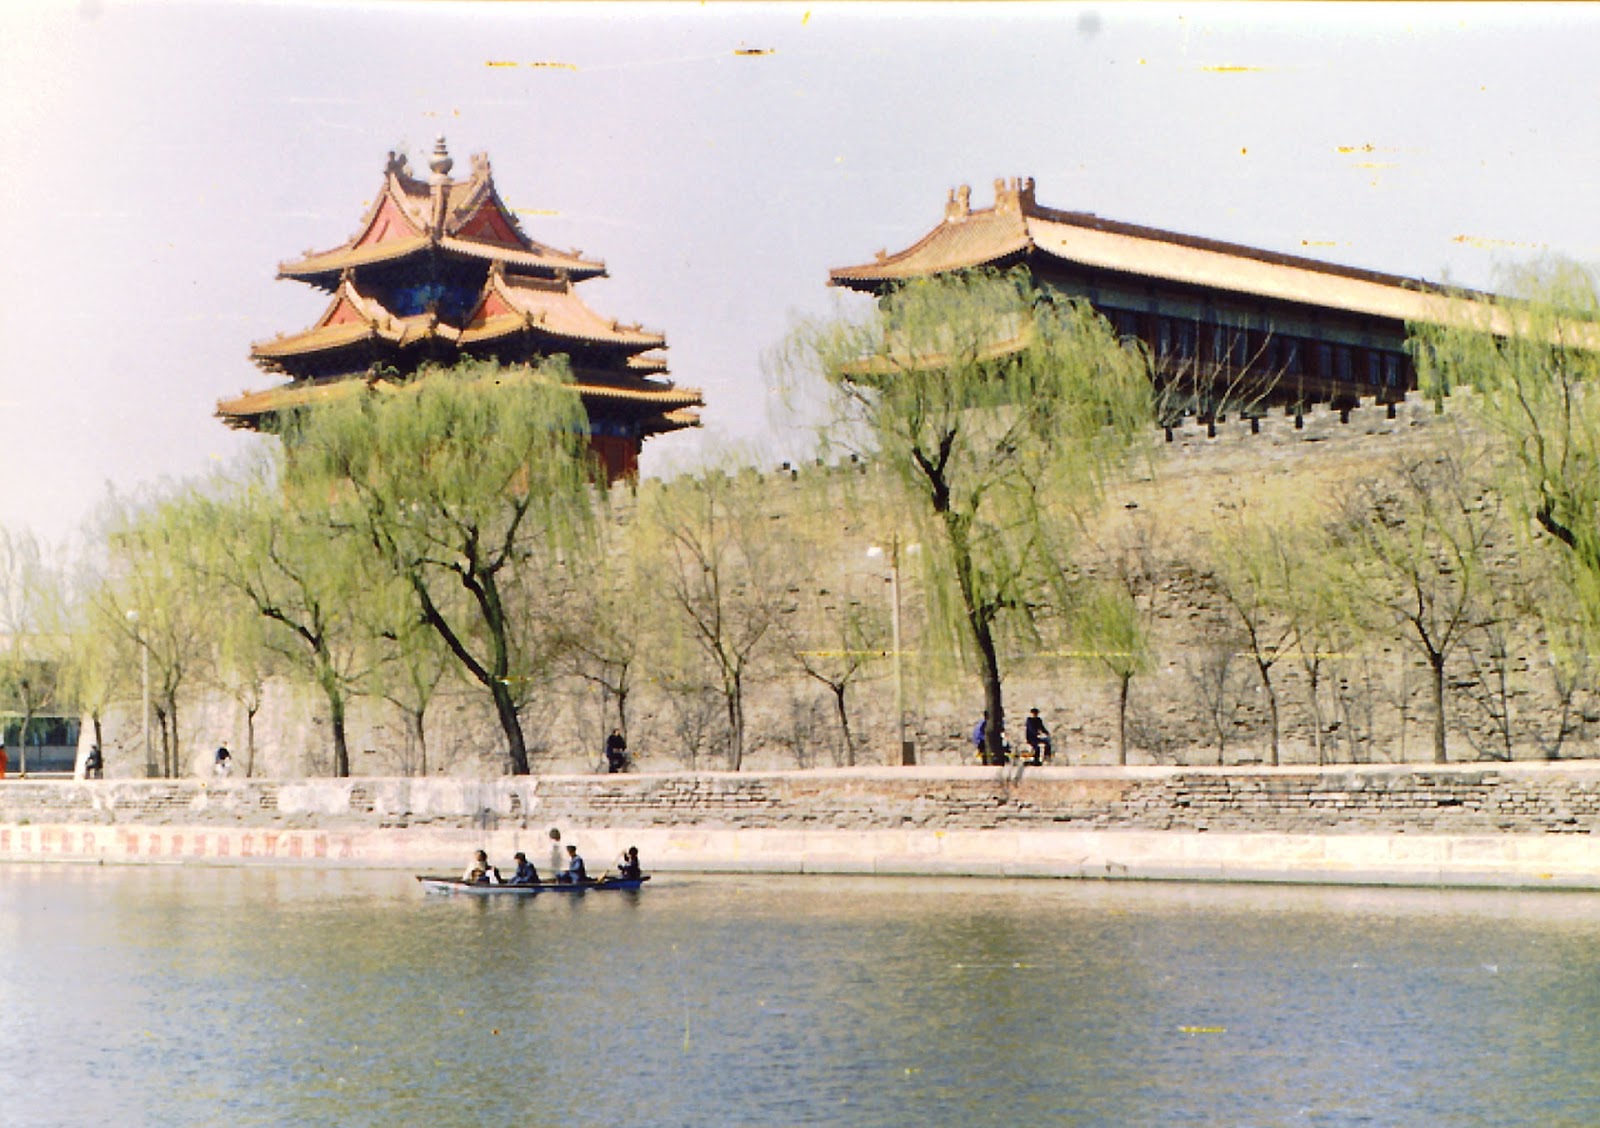 Archive photo from one of the trips to China in the mid-90s